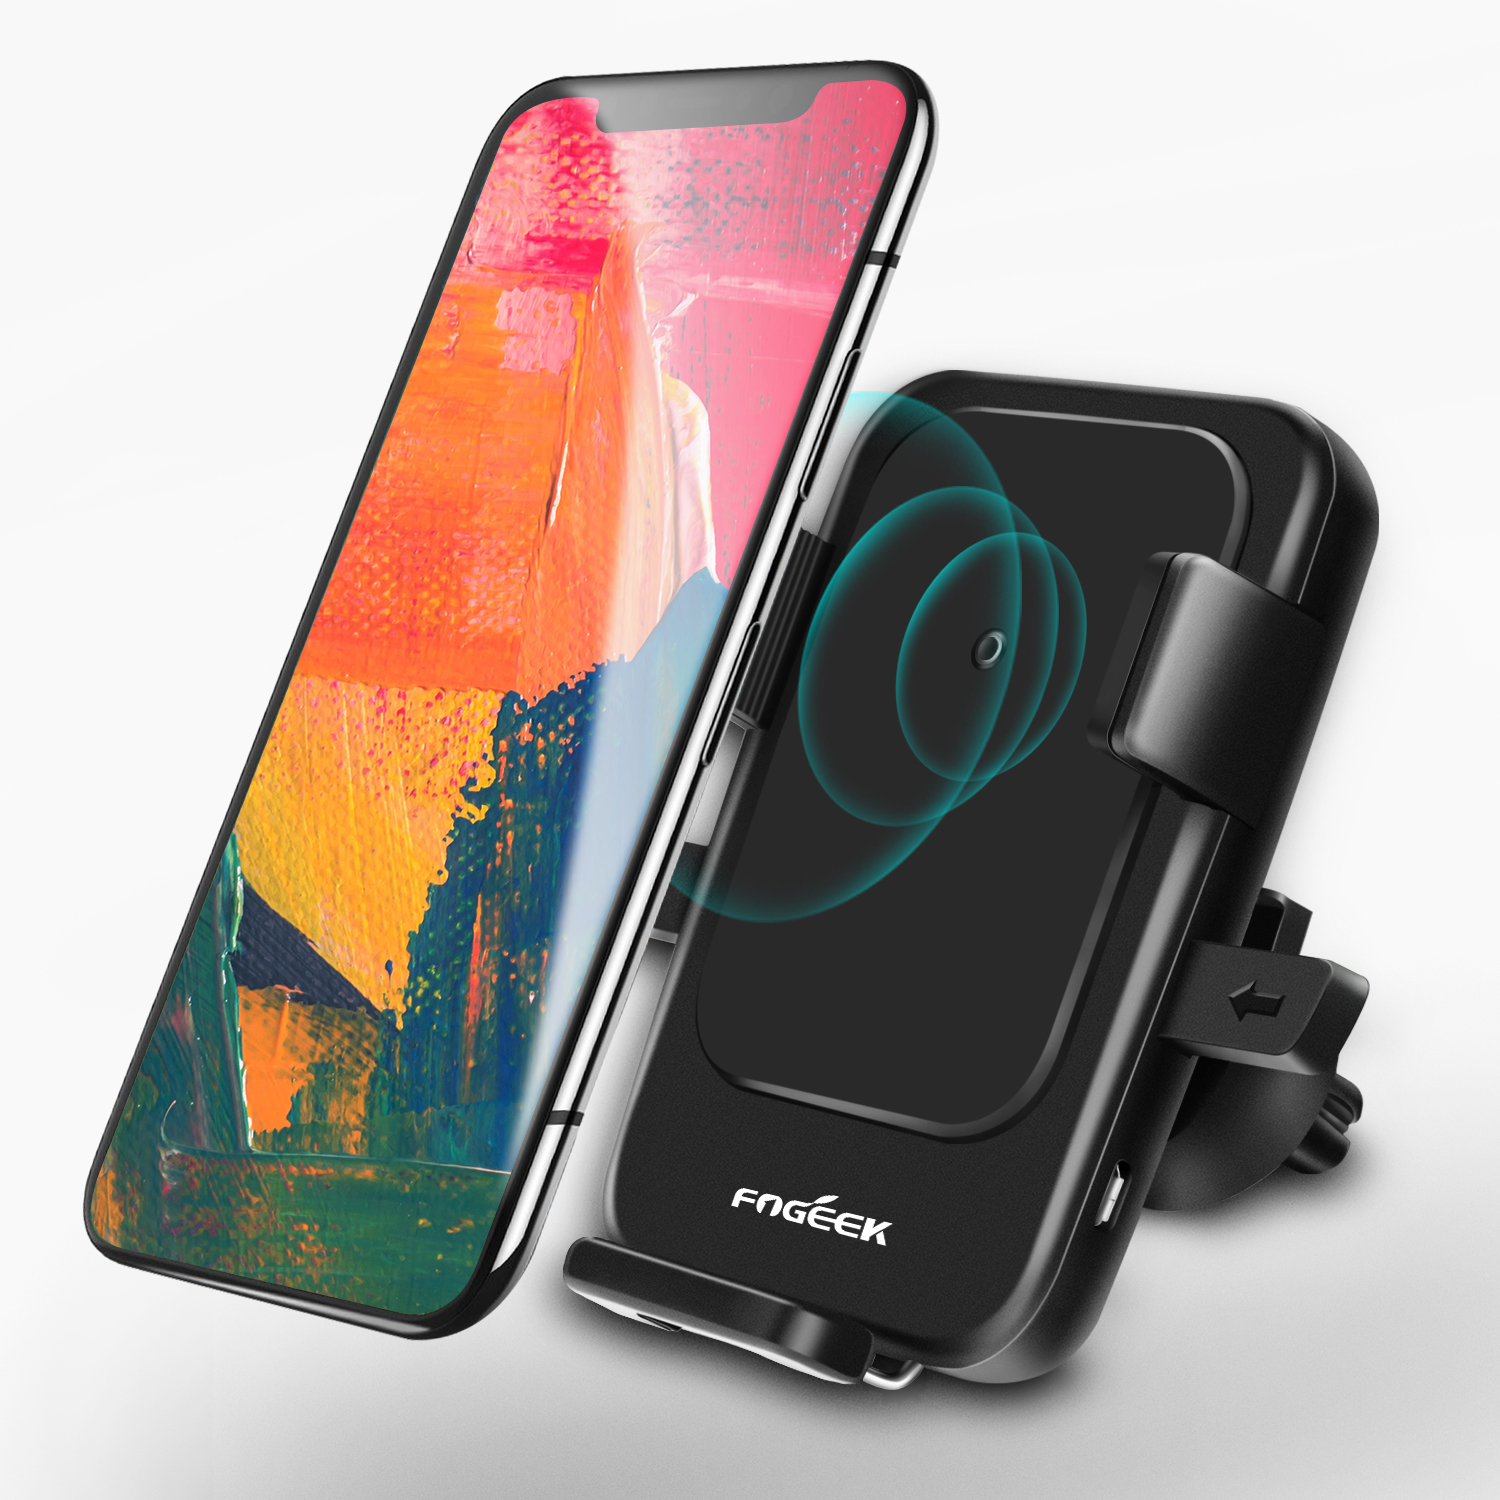 Wireless Car Charger,FOGEEK 2 in 1 Qi Wireless Car Charger Mount, 360°Rotatable Air Vent Phone Holder Cradle,Fast Charging for Samsung Galaxy S9/S9+ S8/S8+ S7/S7 Edge,Standard Charging for iPhone X/8/8 Plus